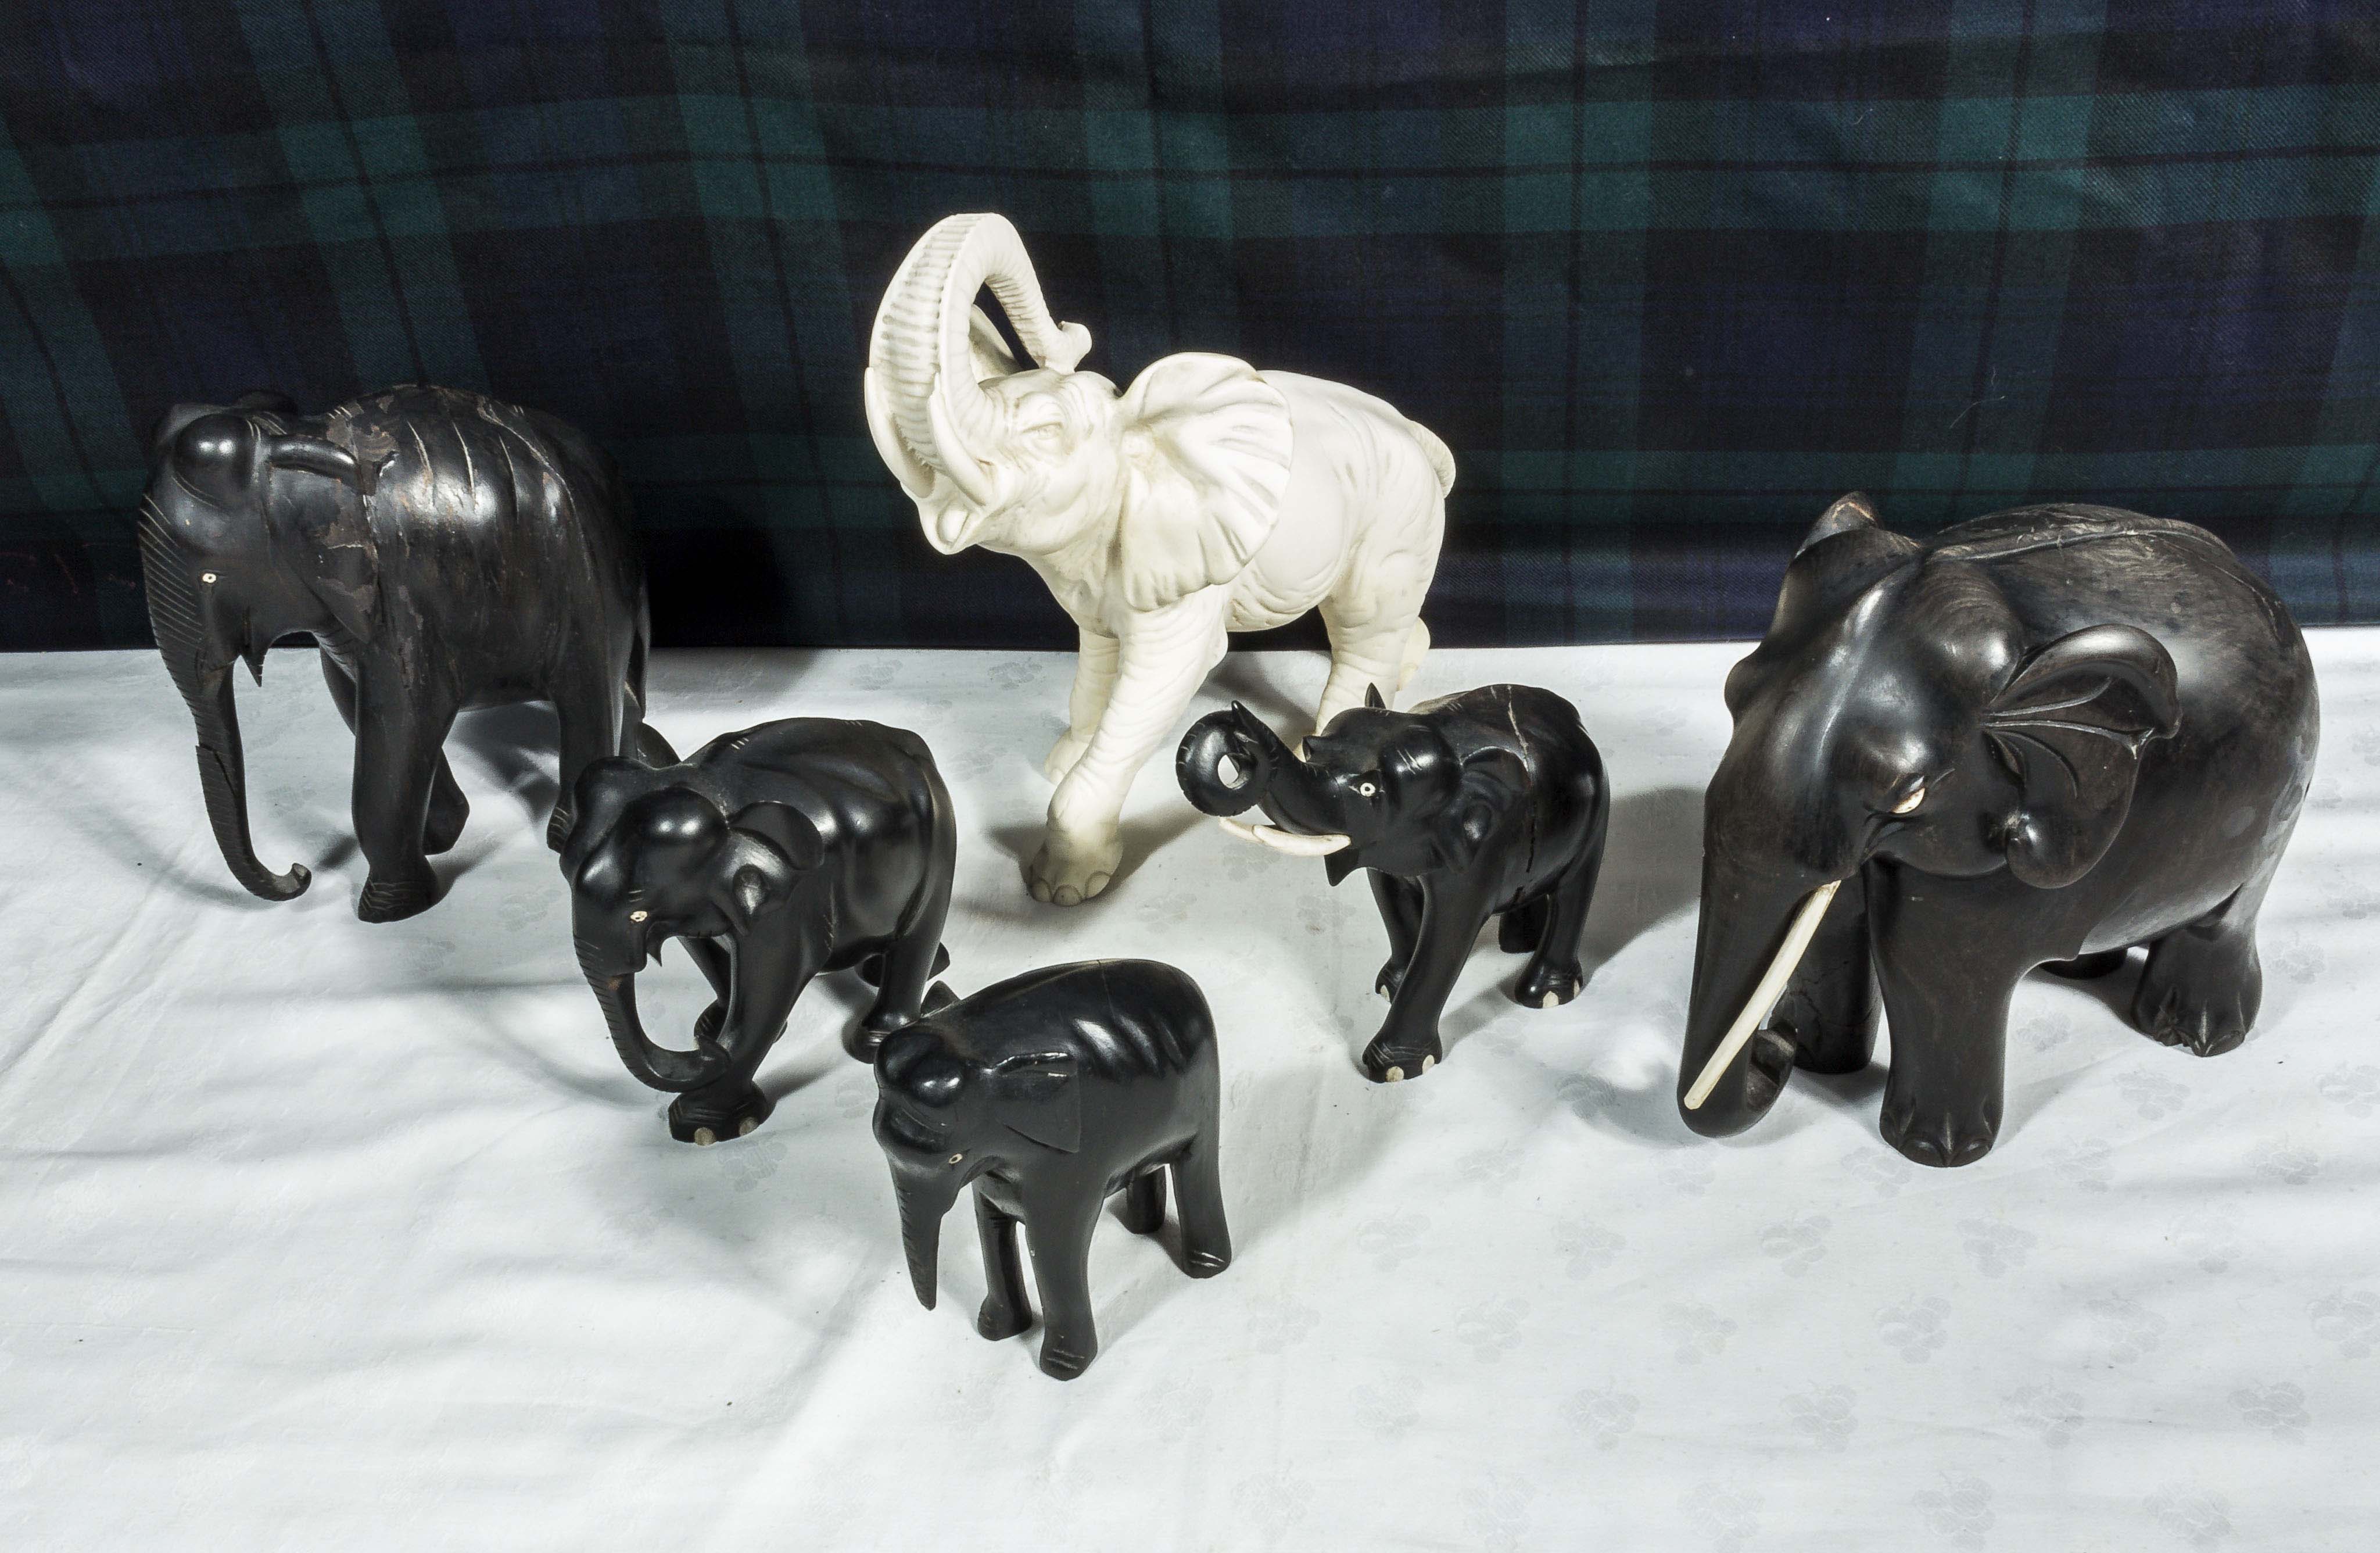 Six carved wooden elephants